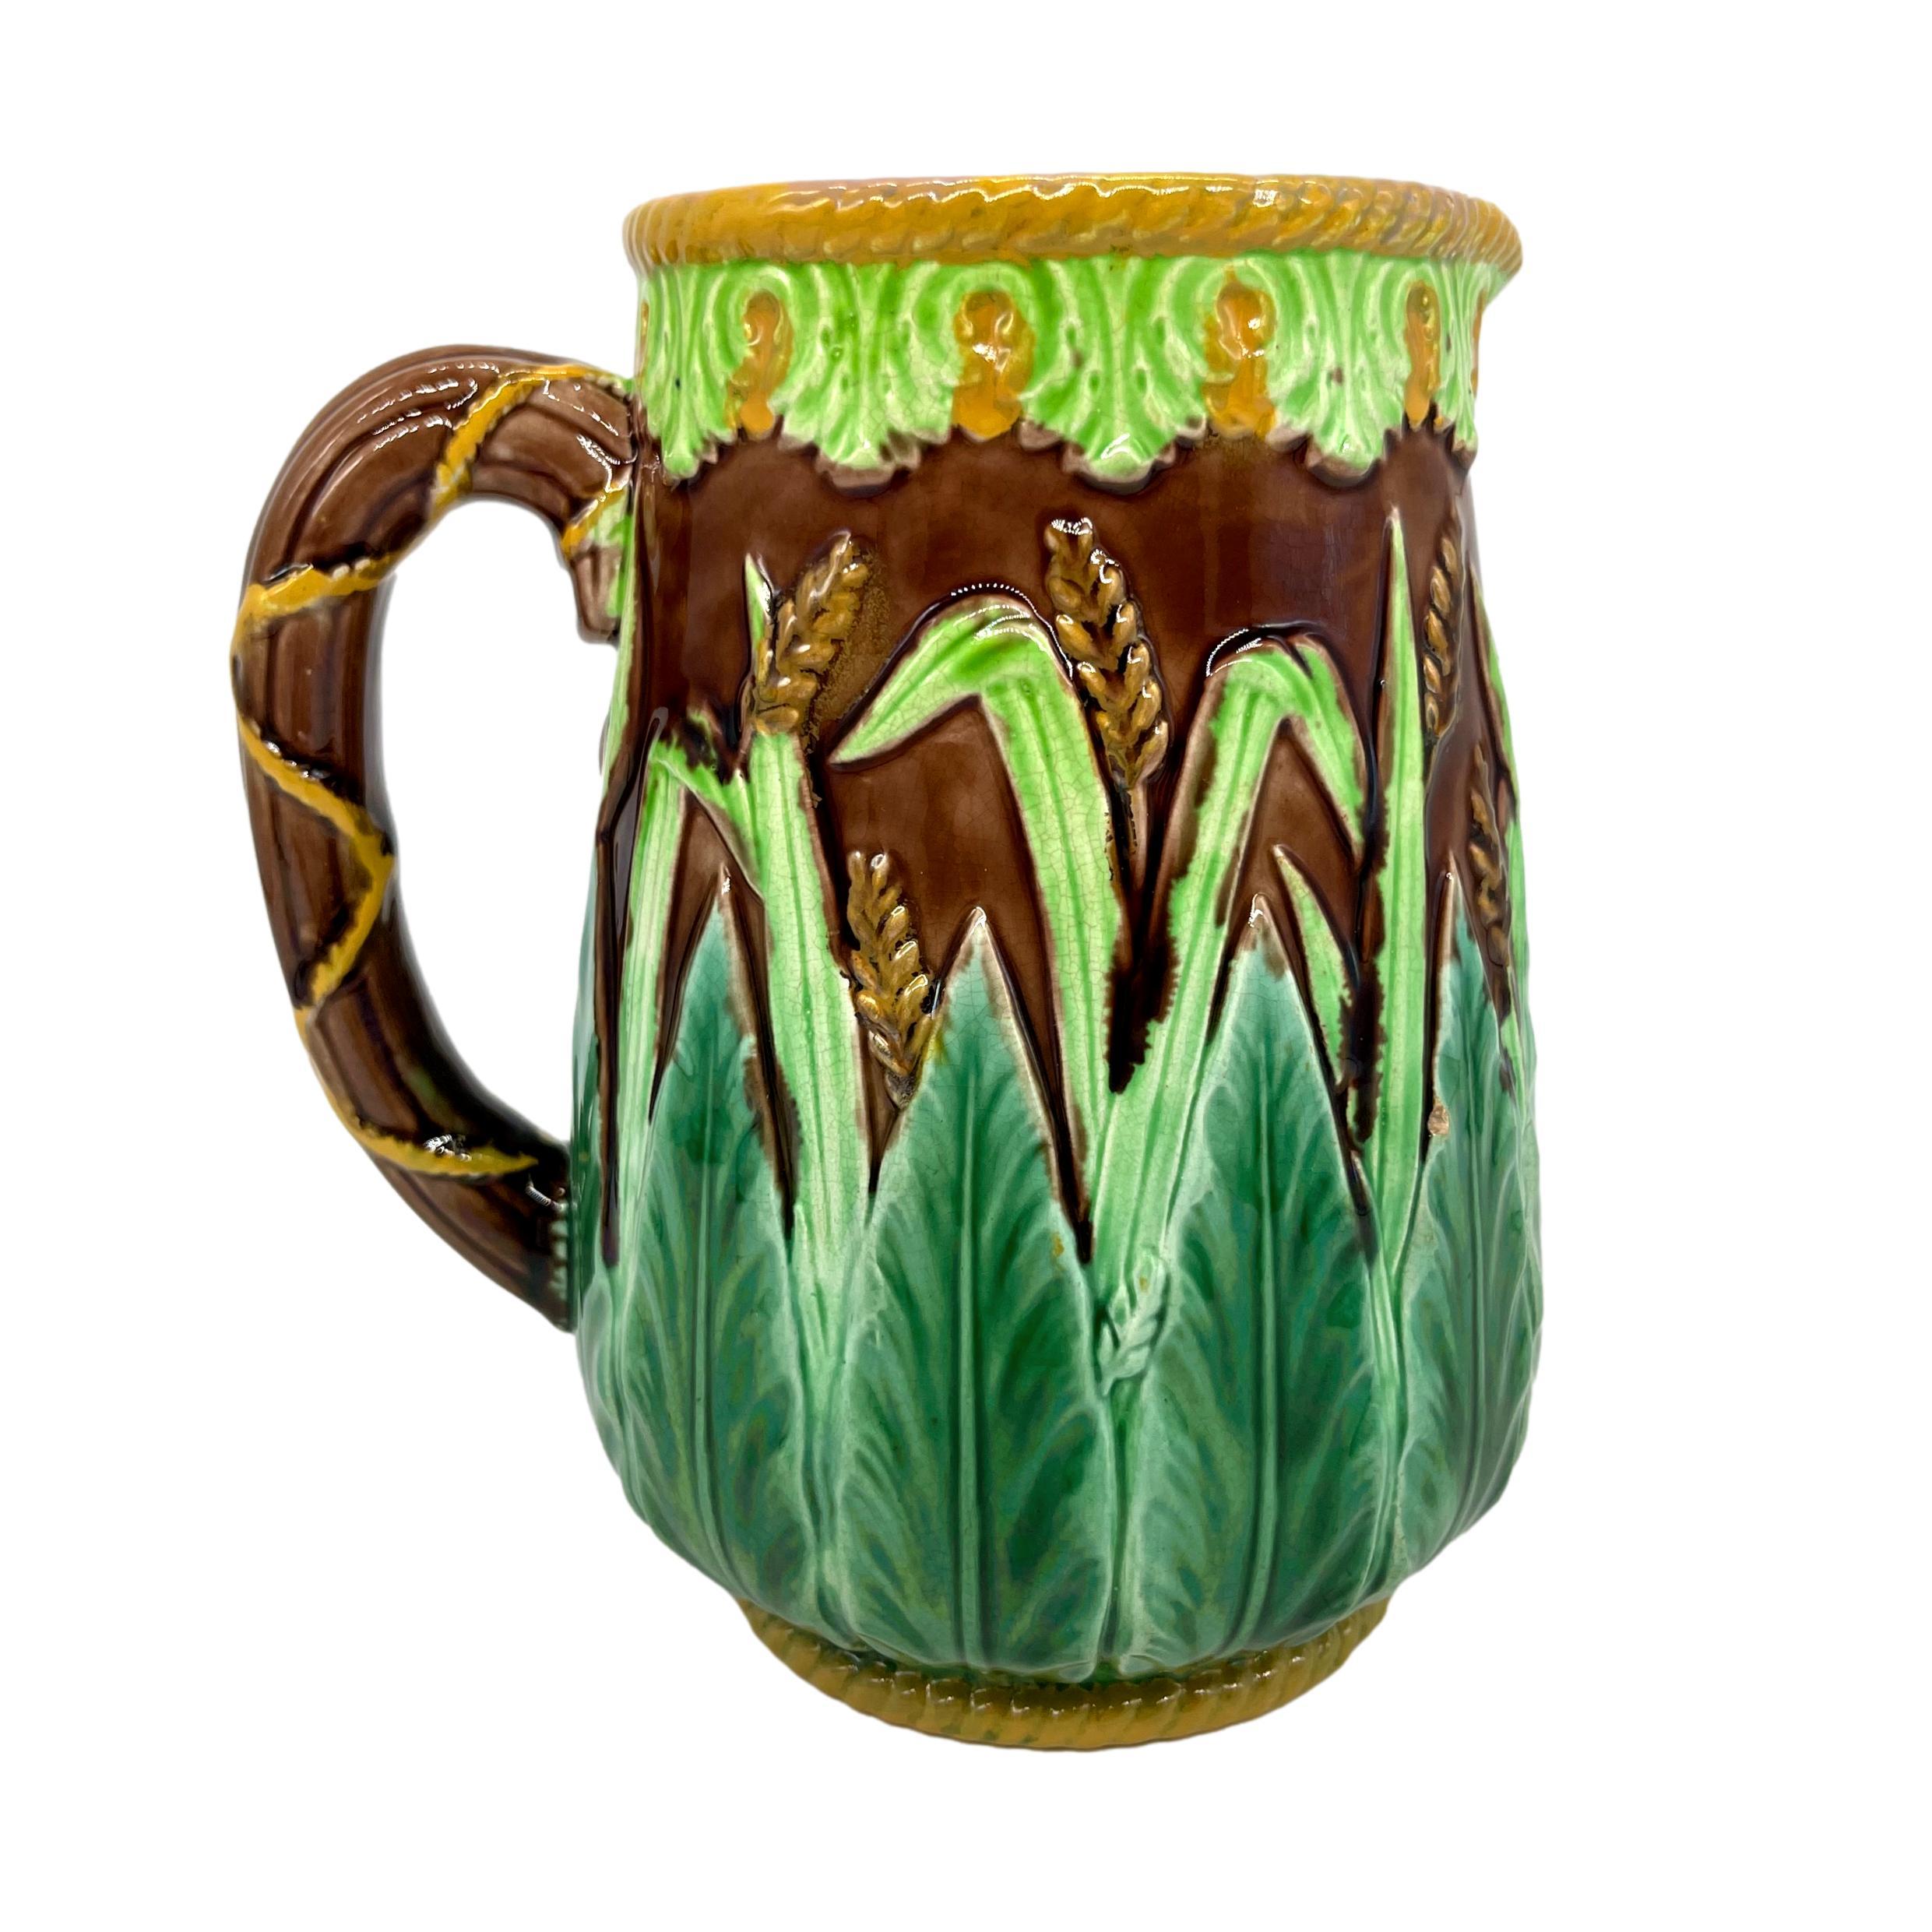 George Jones Majolica Pitcher, of baluster form with relief molded stiff acanthus leaves, grasses, and wheat on a brown ground, the top banded with stylized leaves glazed in chartreuse, with yellow glazed roping to the top rim and foot rim, the